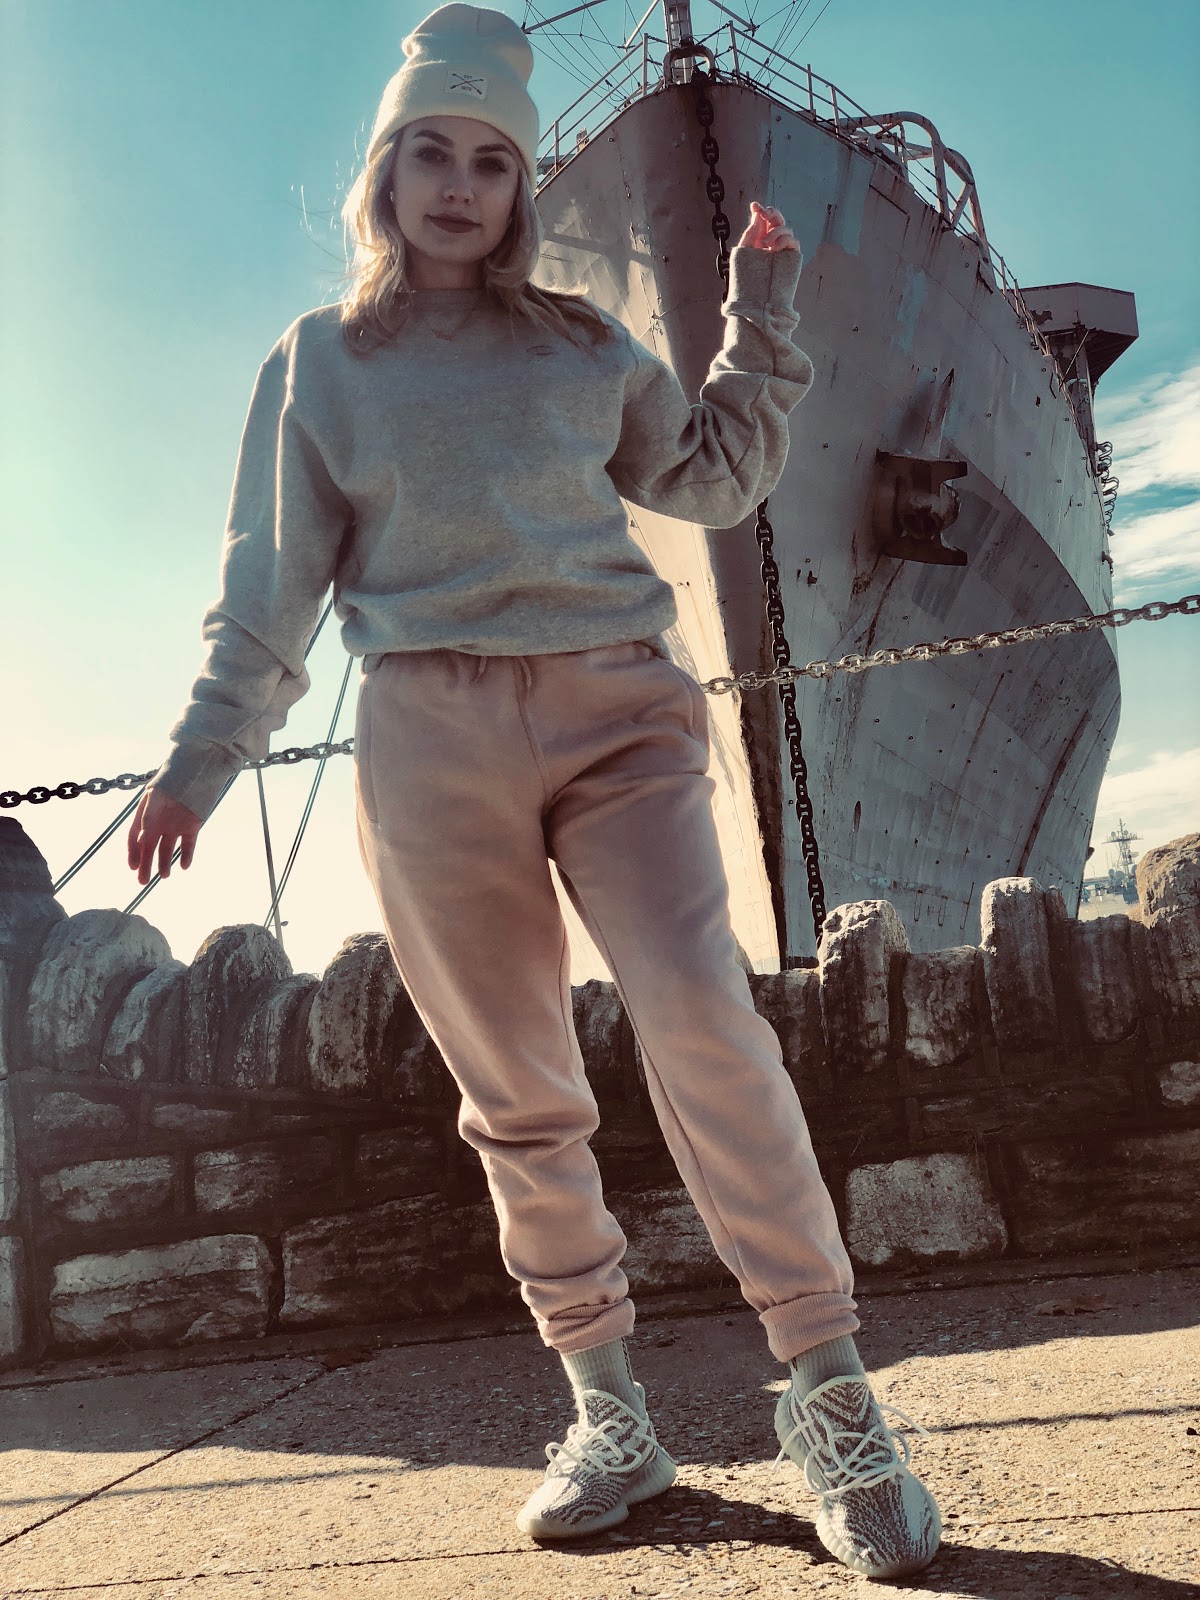 yeezy 350 v2 blue tint outfit